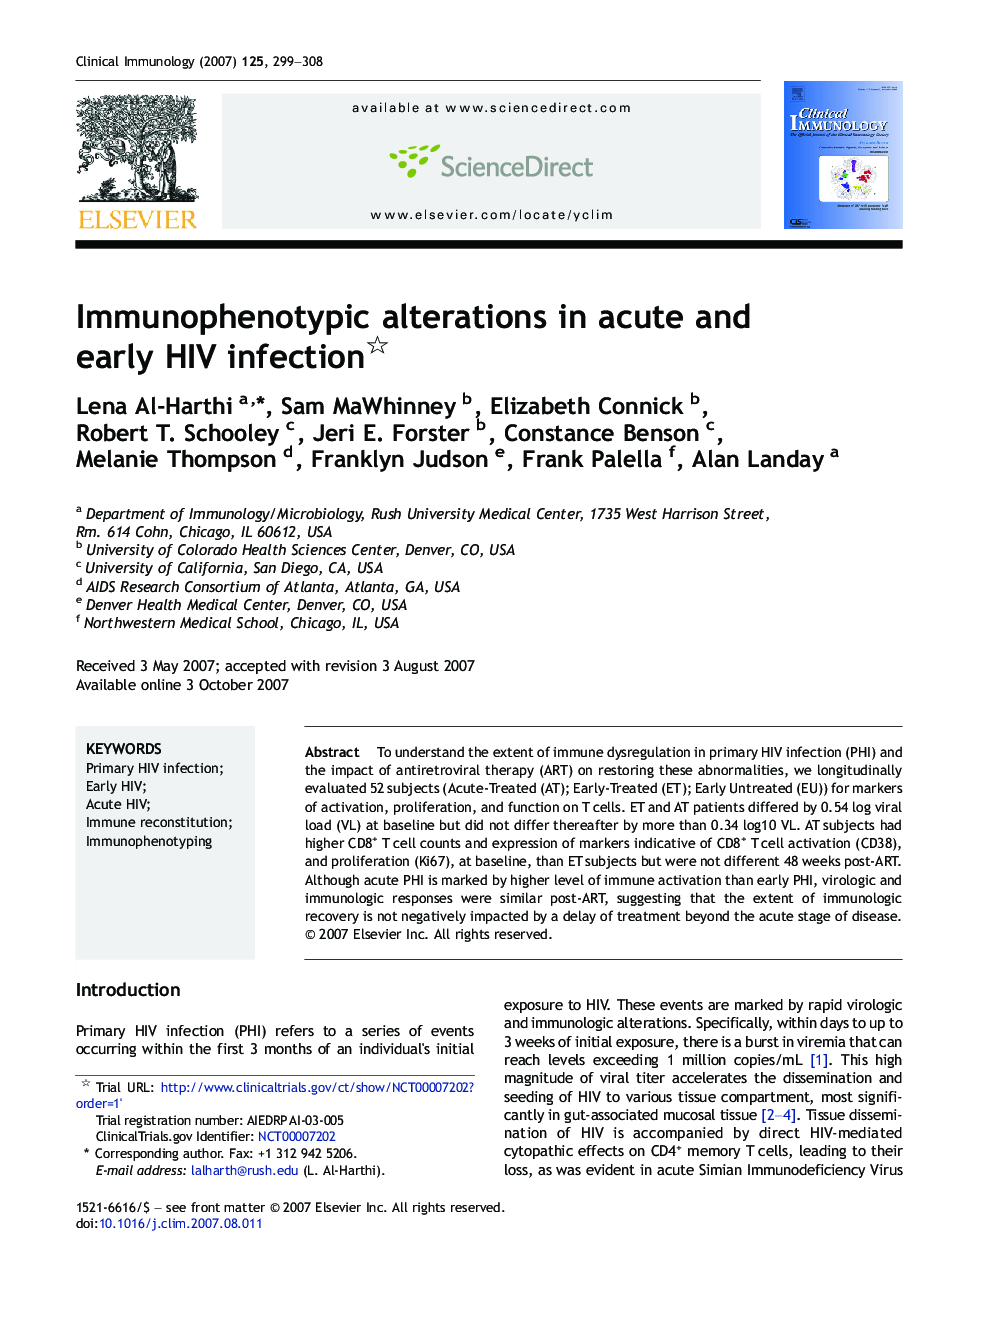 Immunophenotypic alterations in acute and early HIV infection 